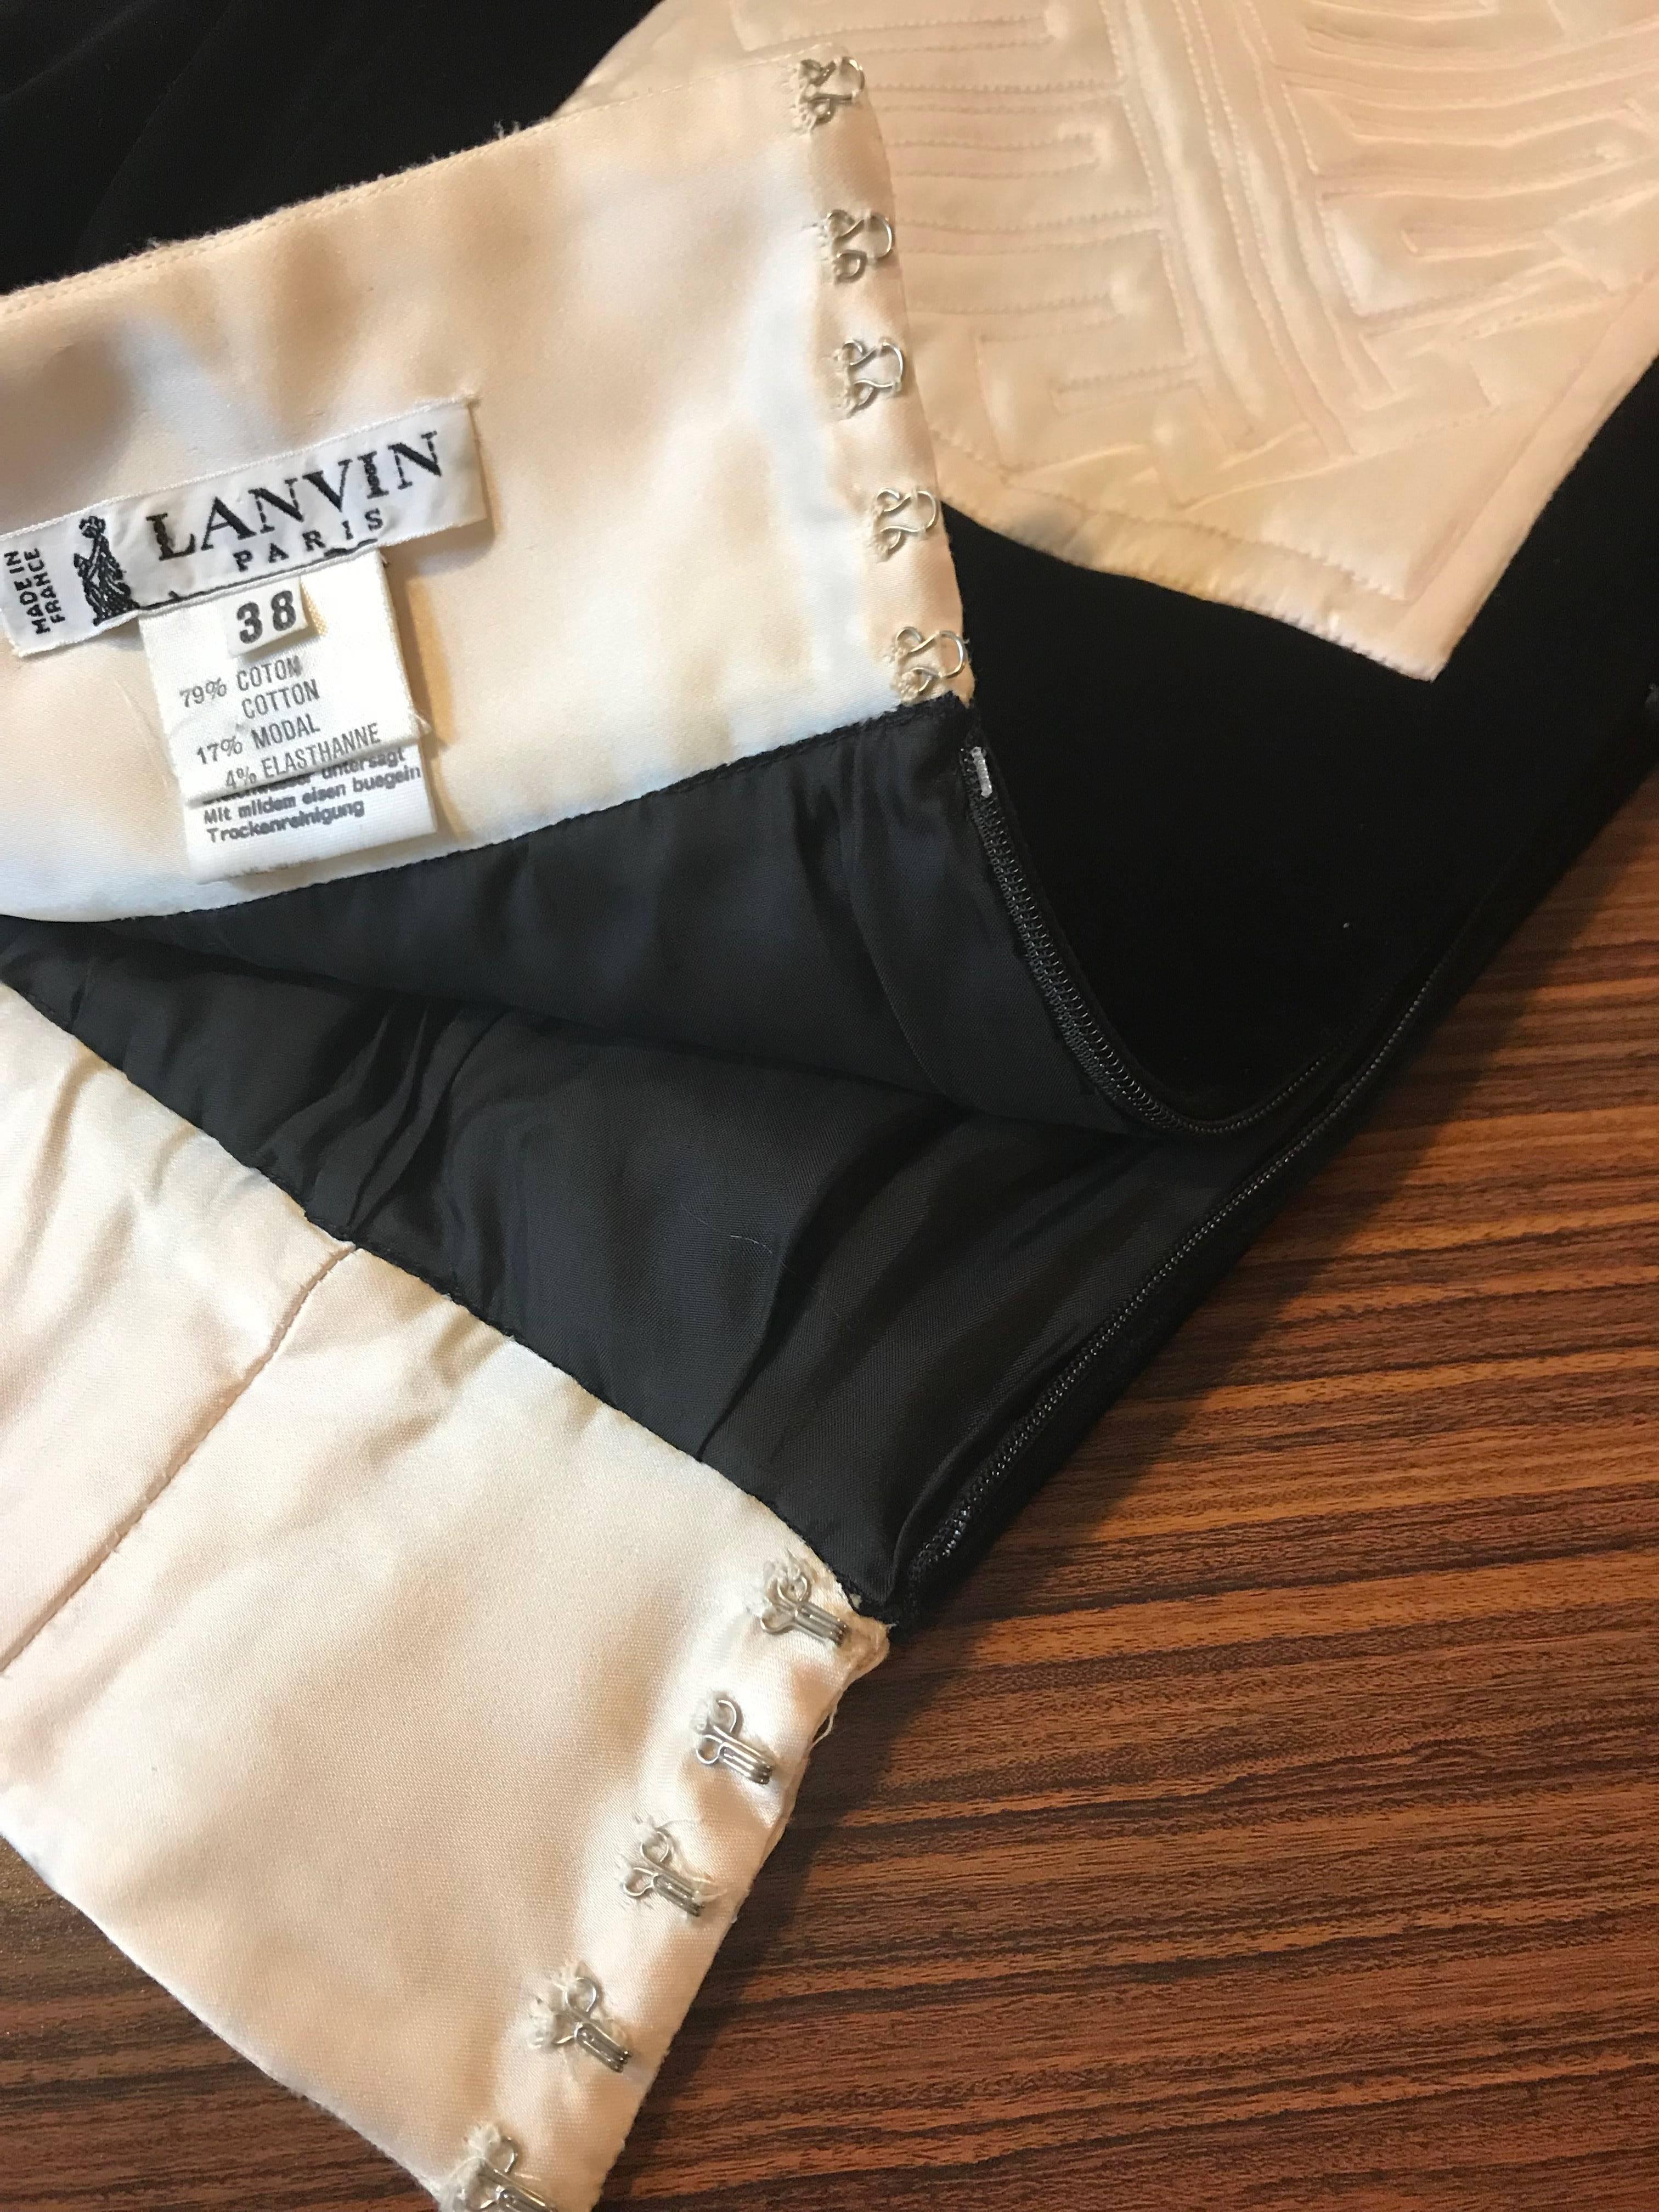 Lanvin Vintage Black Velvet Skirt With Cream Quilted Satin Trim In Good Condition For Sale In San Francisco, CA